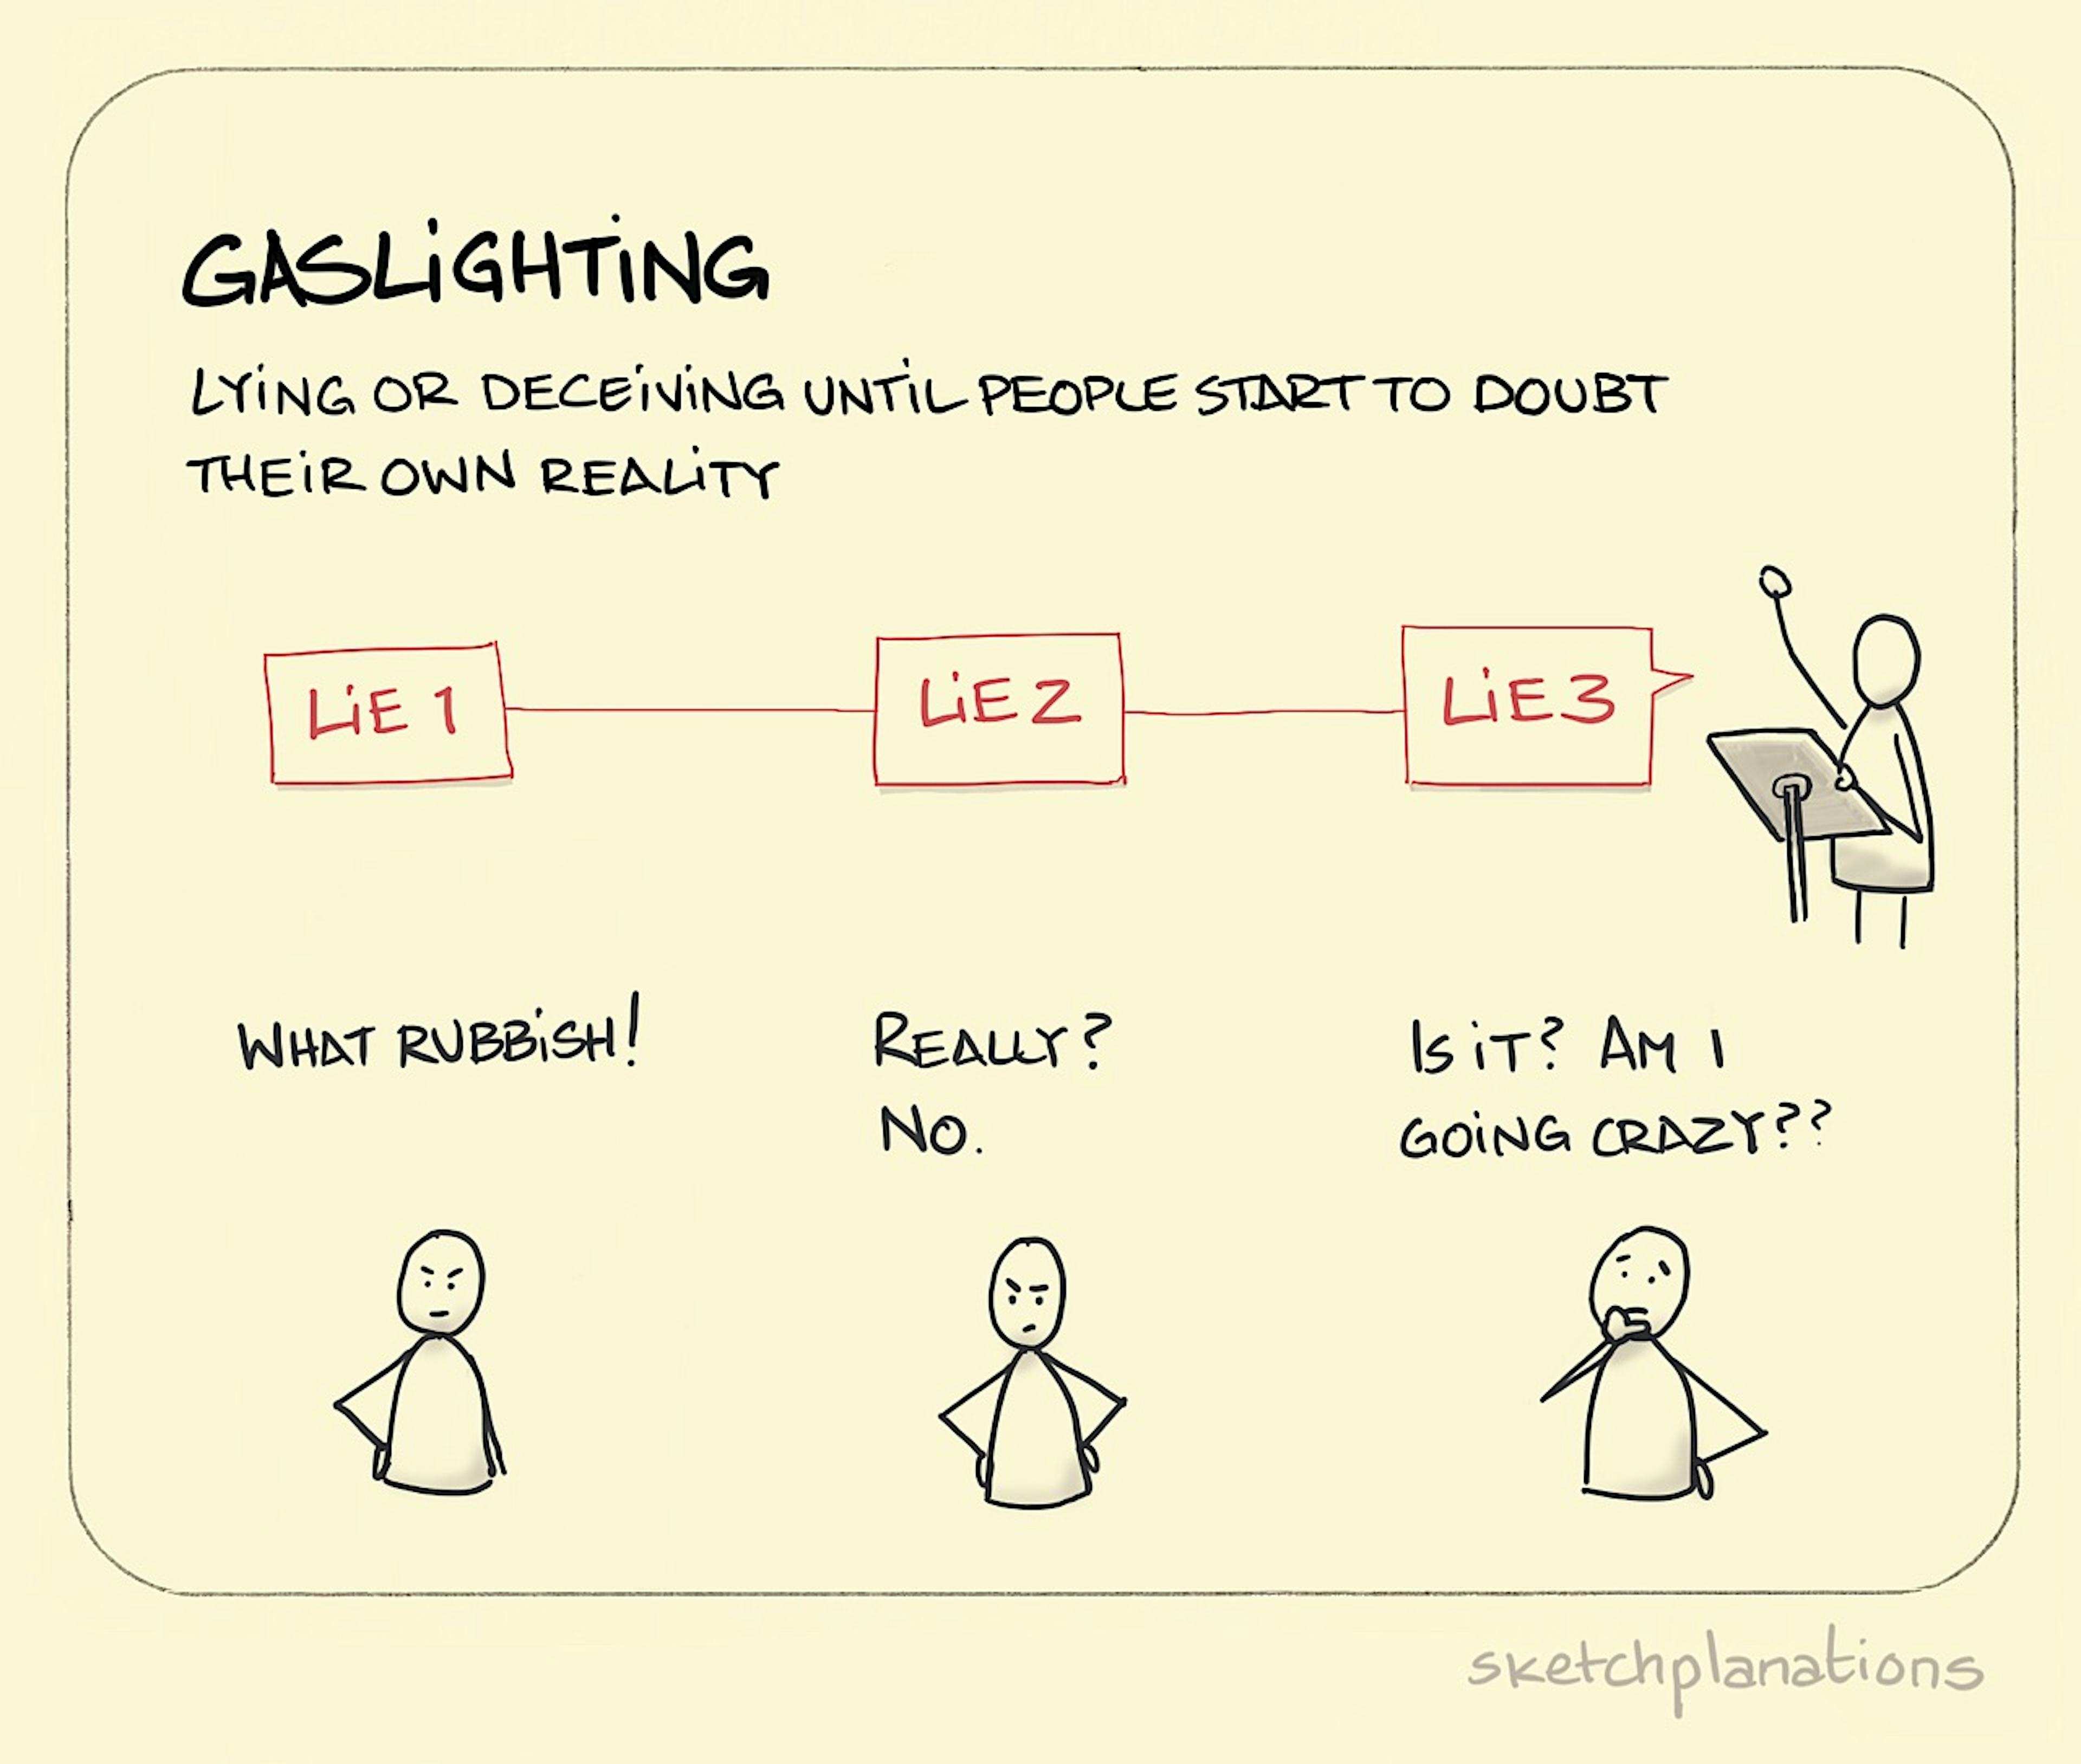 Gaslighting illustration: an individual making a speech at their lectern tells lie after lie after lie. As the lies keep coming an audience member starts to question their own, previously firm, understanding.   